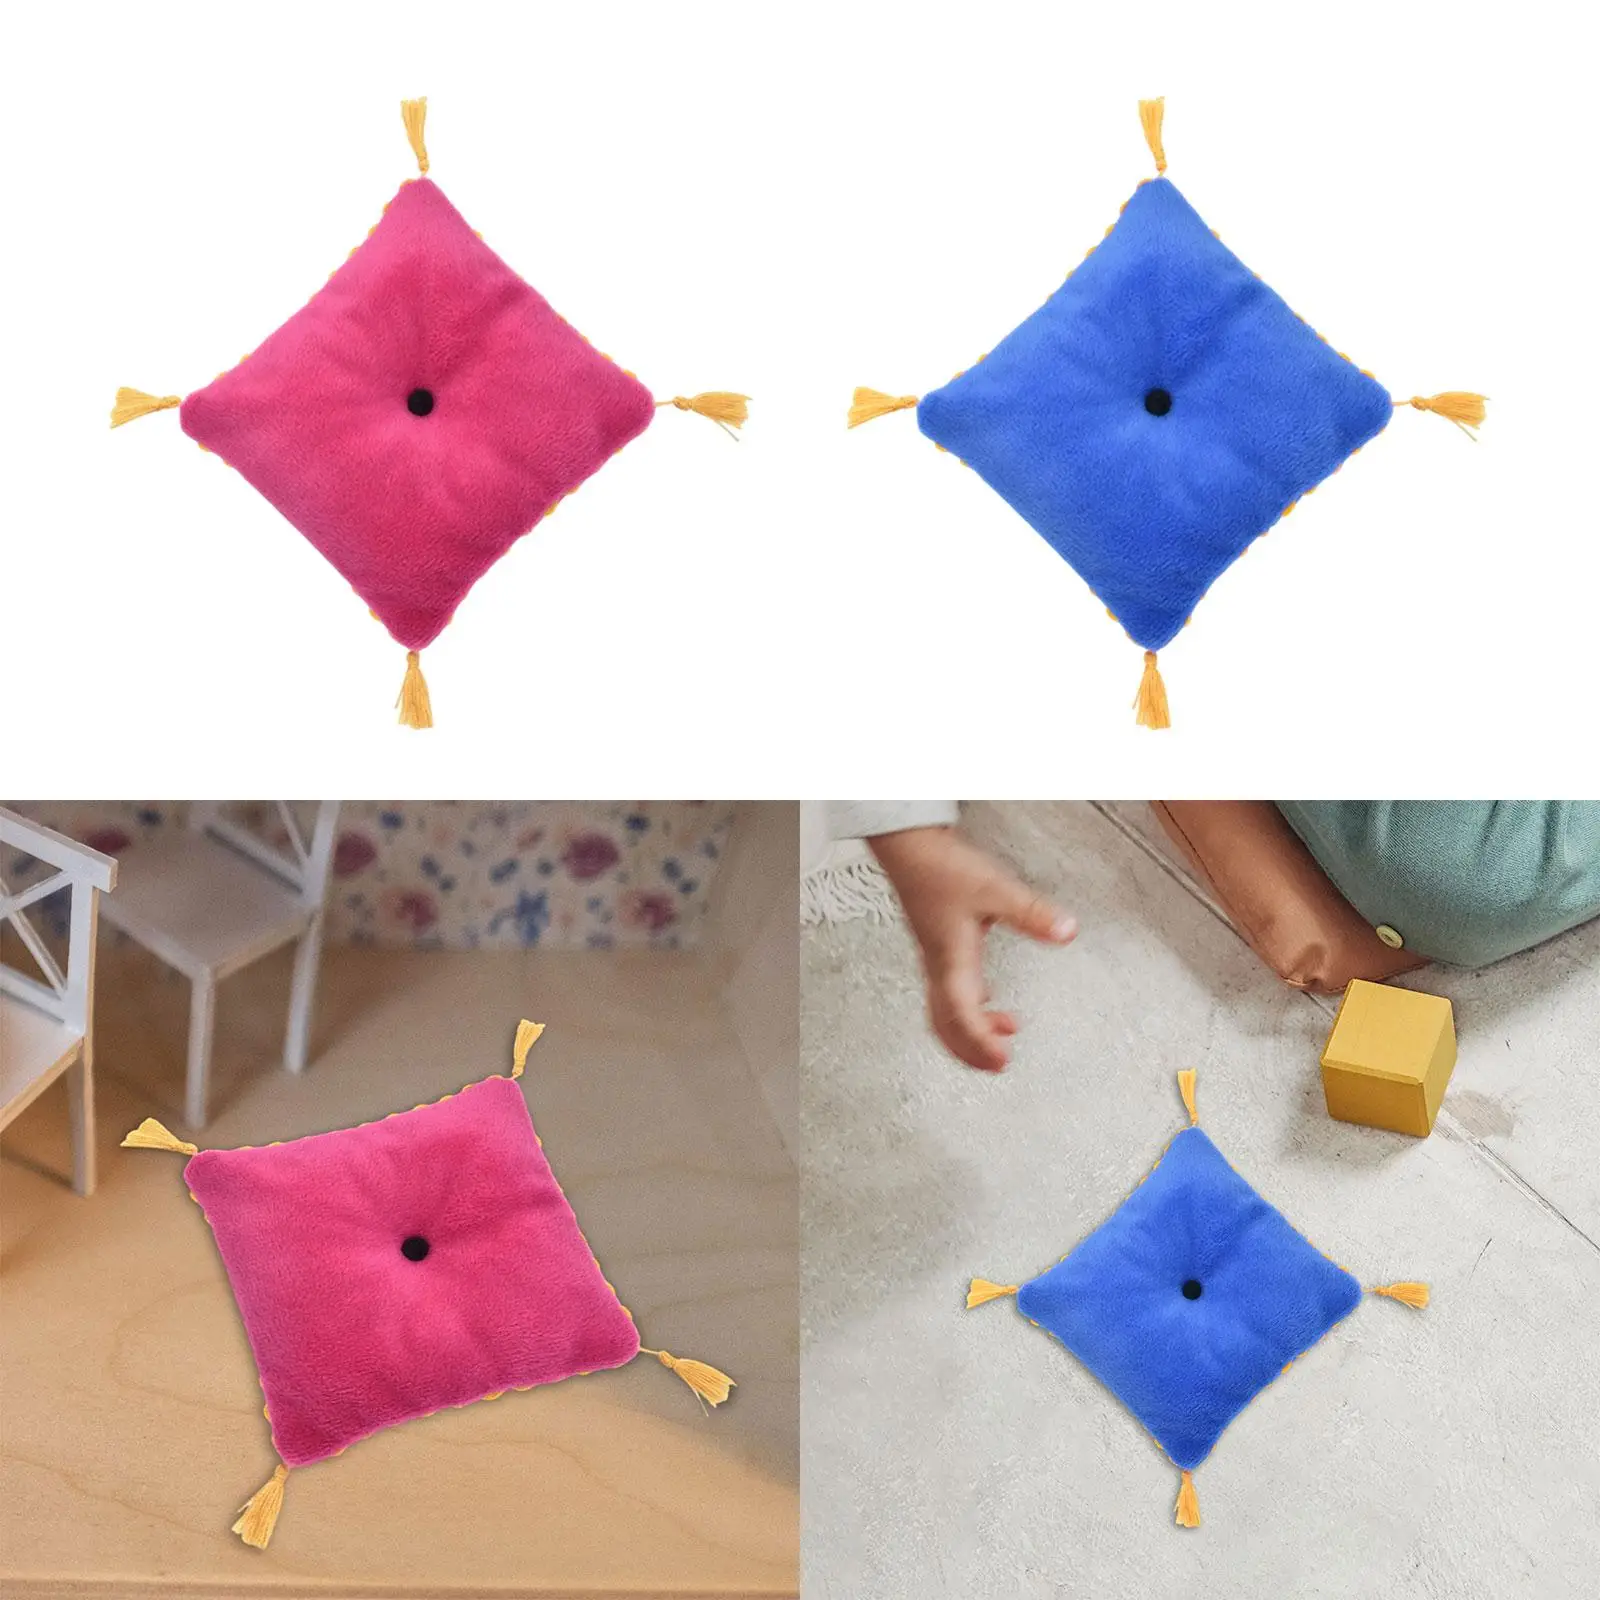 1:6 Scale Dollhouse Pillow Accessories DIY Craft Dollhouse Furniture Miniature Furniture Accessory for Girls Boys Holiday Gifts